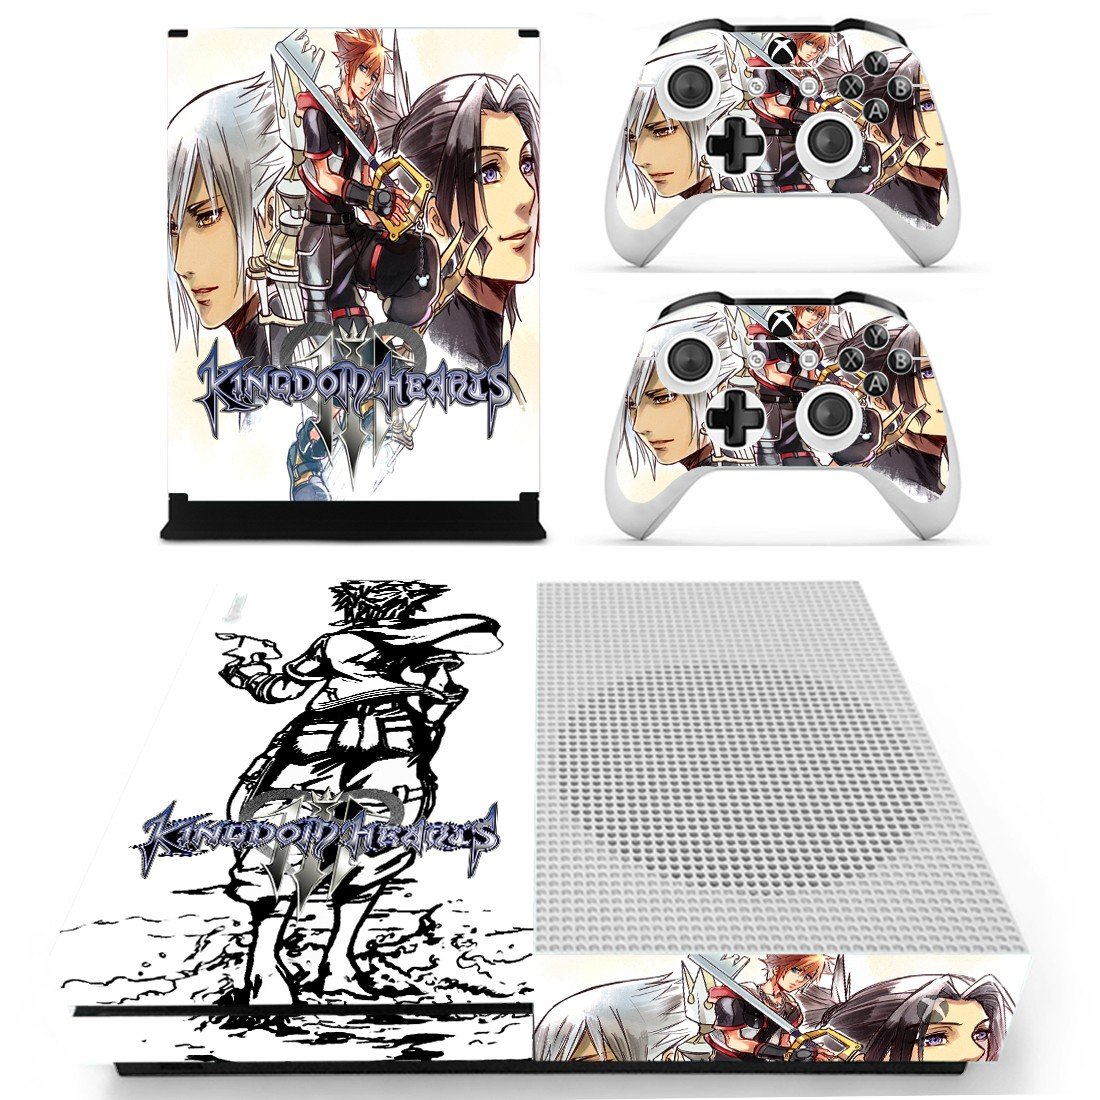 Xbox One S And Controllers Skin Cover Kingdom Hearts 3